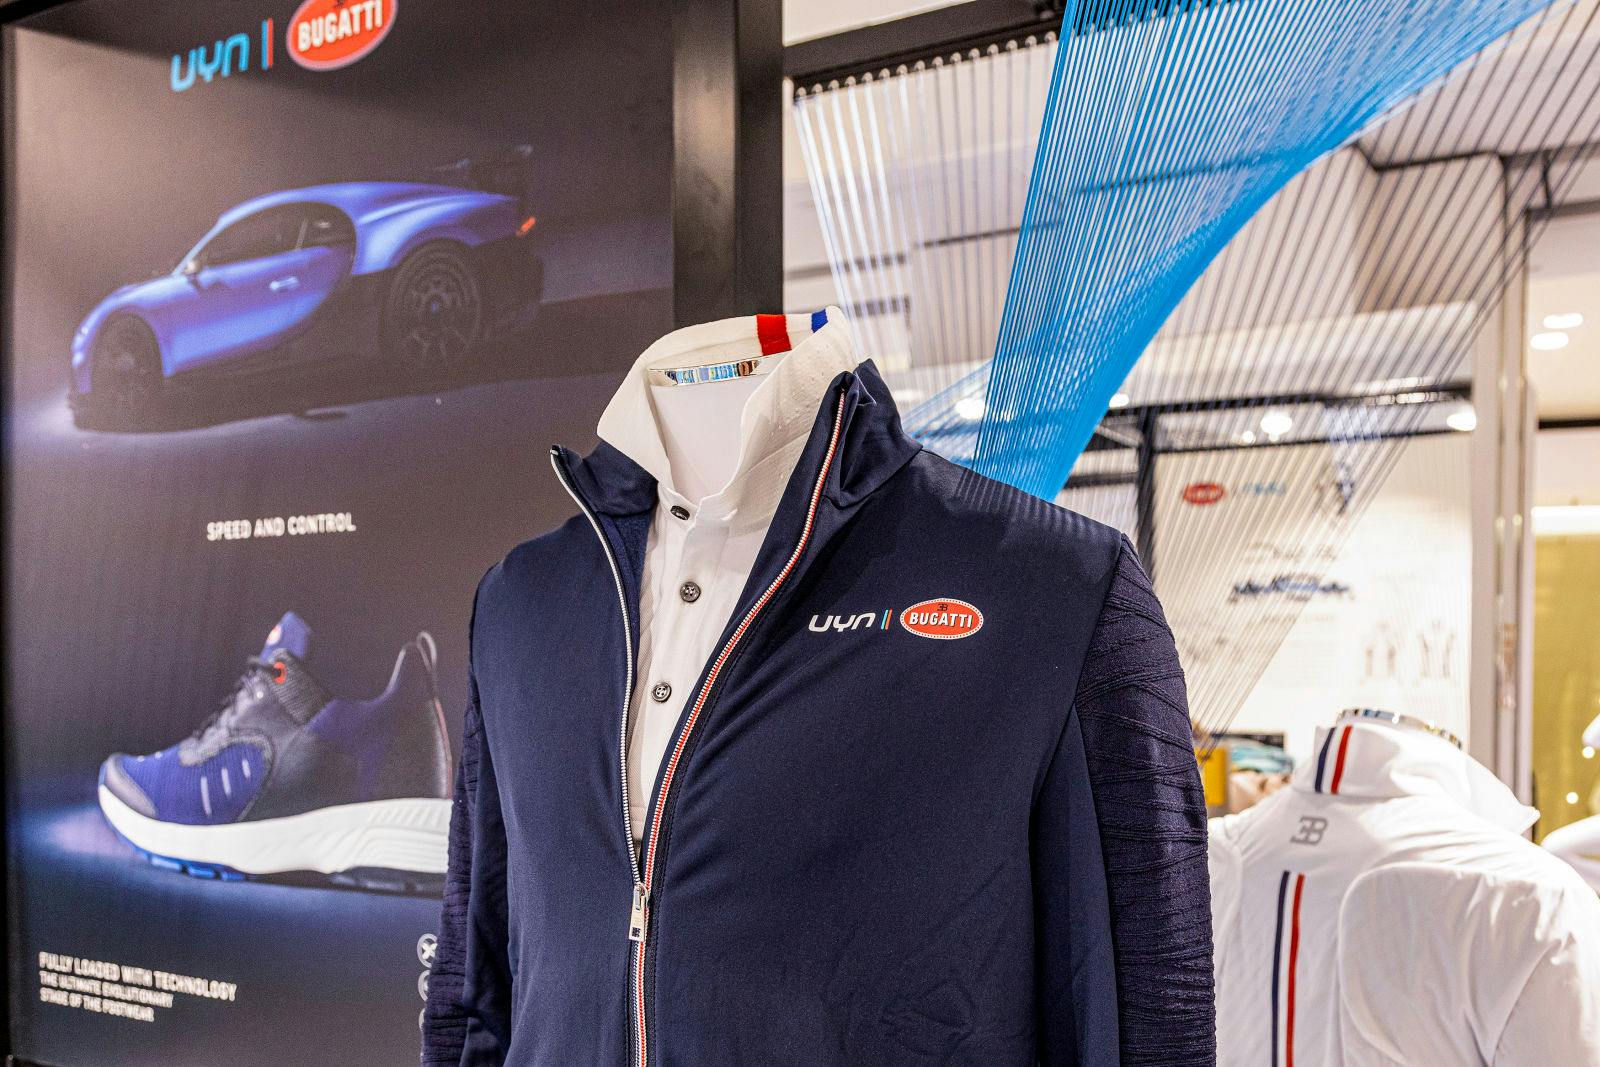 The "UYN for BUGATTI" quilted jacket with Haloflex technology allows for freedom of movement and body temperature regulation.